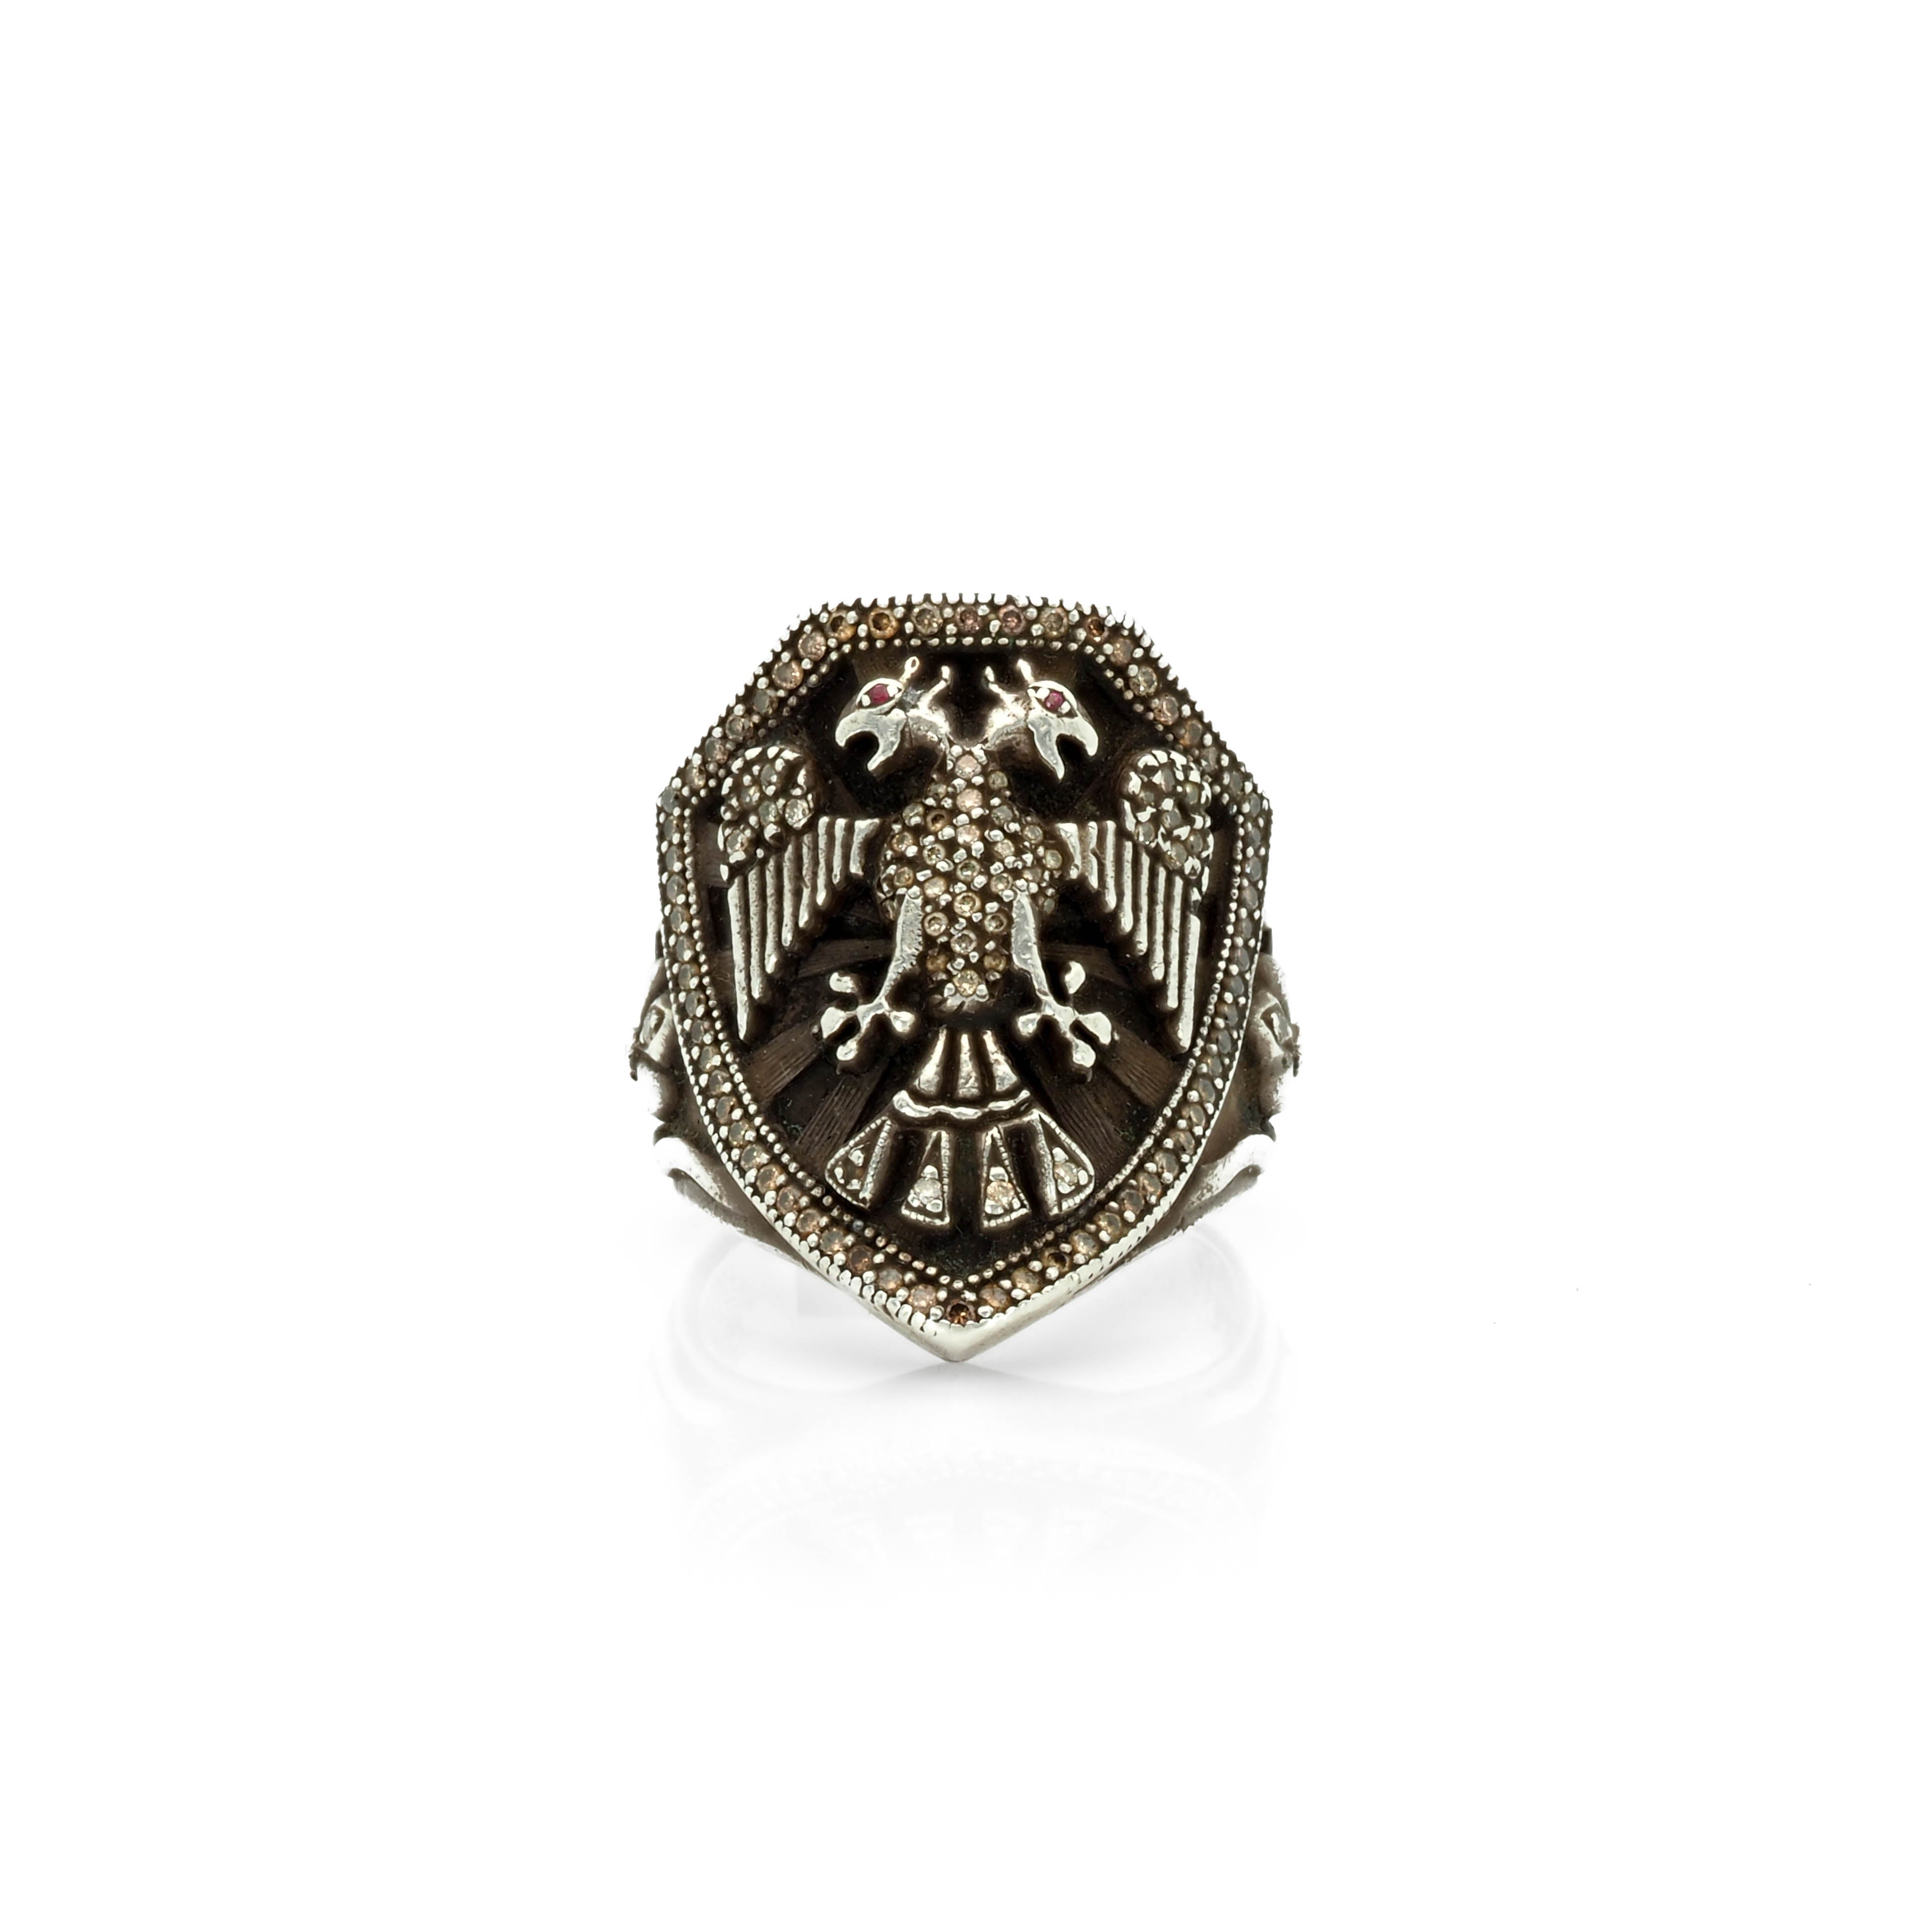 Double Headed Eagle and Shield Ring with Diamonds